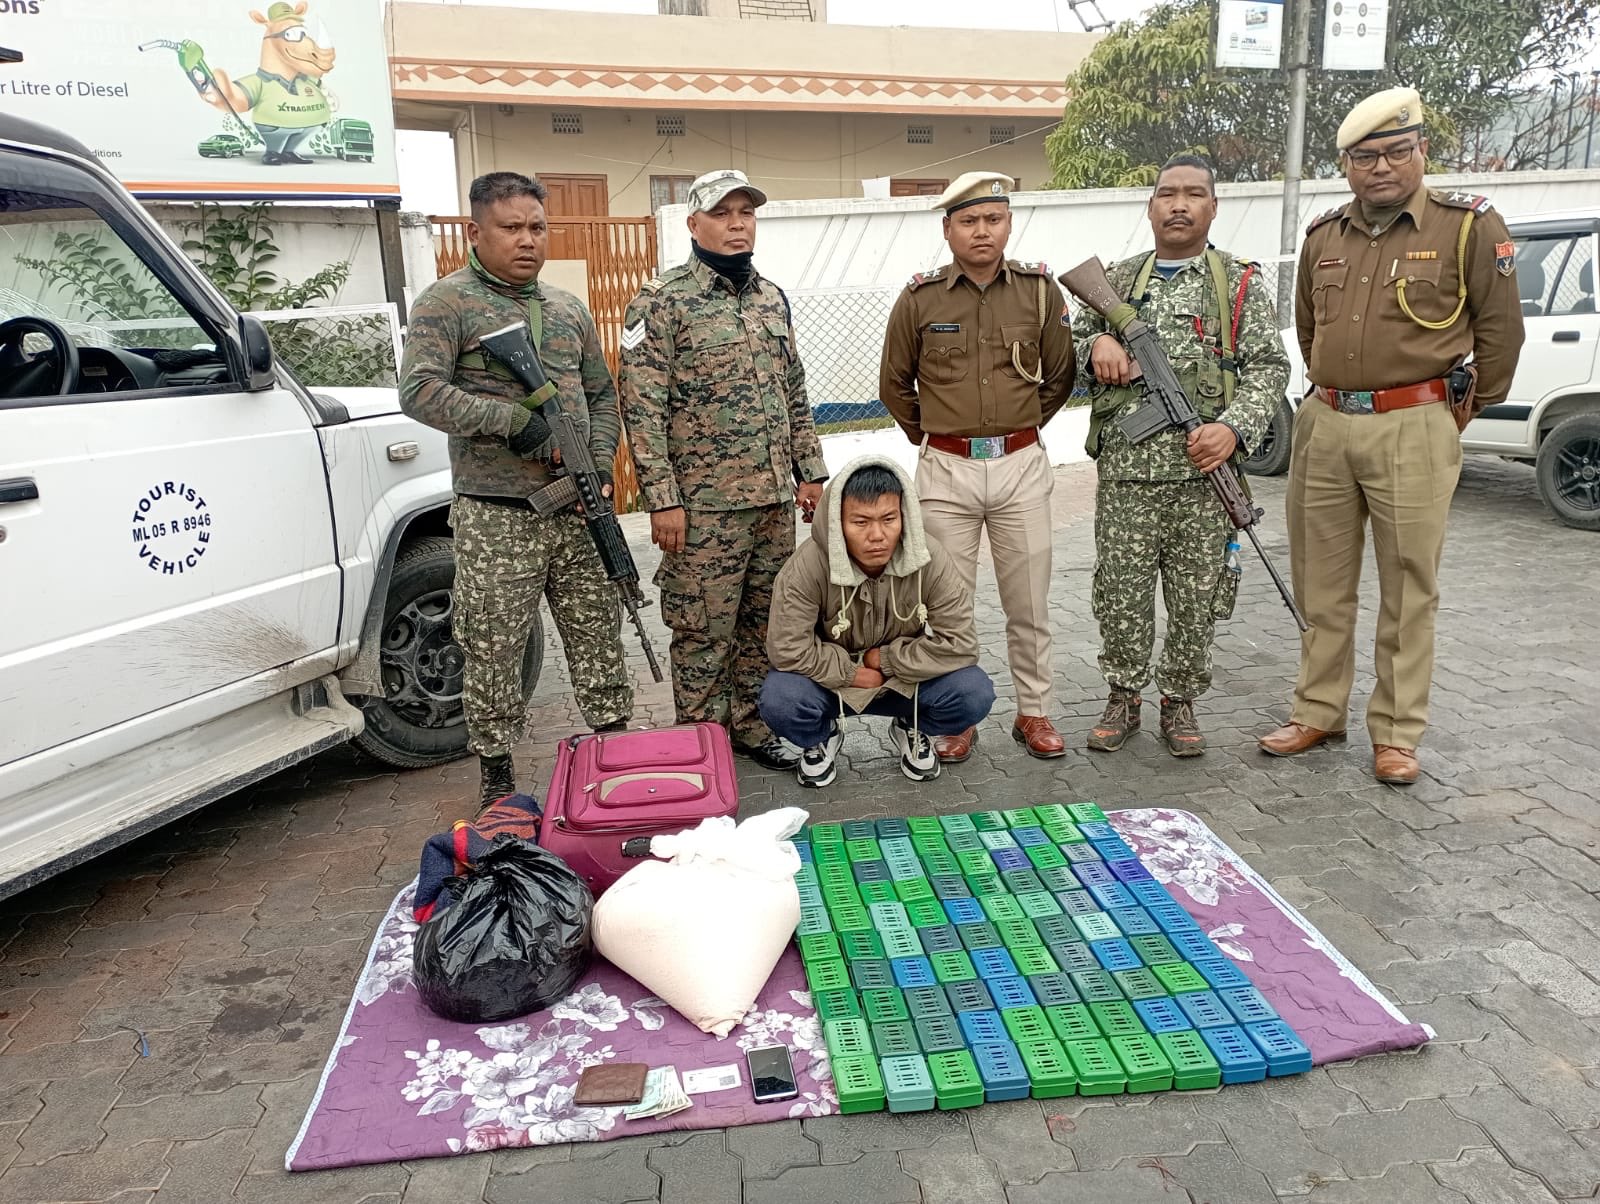 Heroin worth Rs 5 crore seized; Police nabs 1